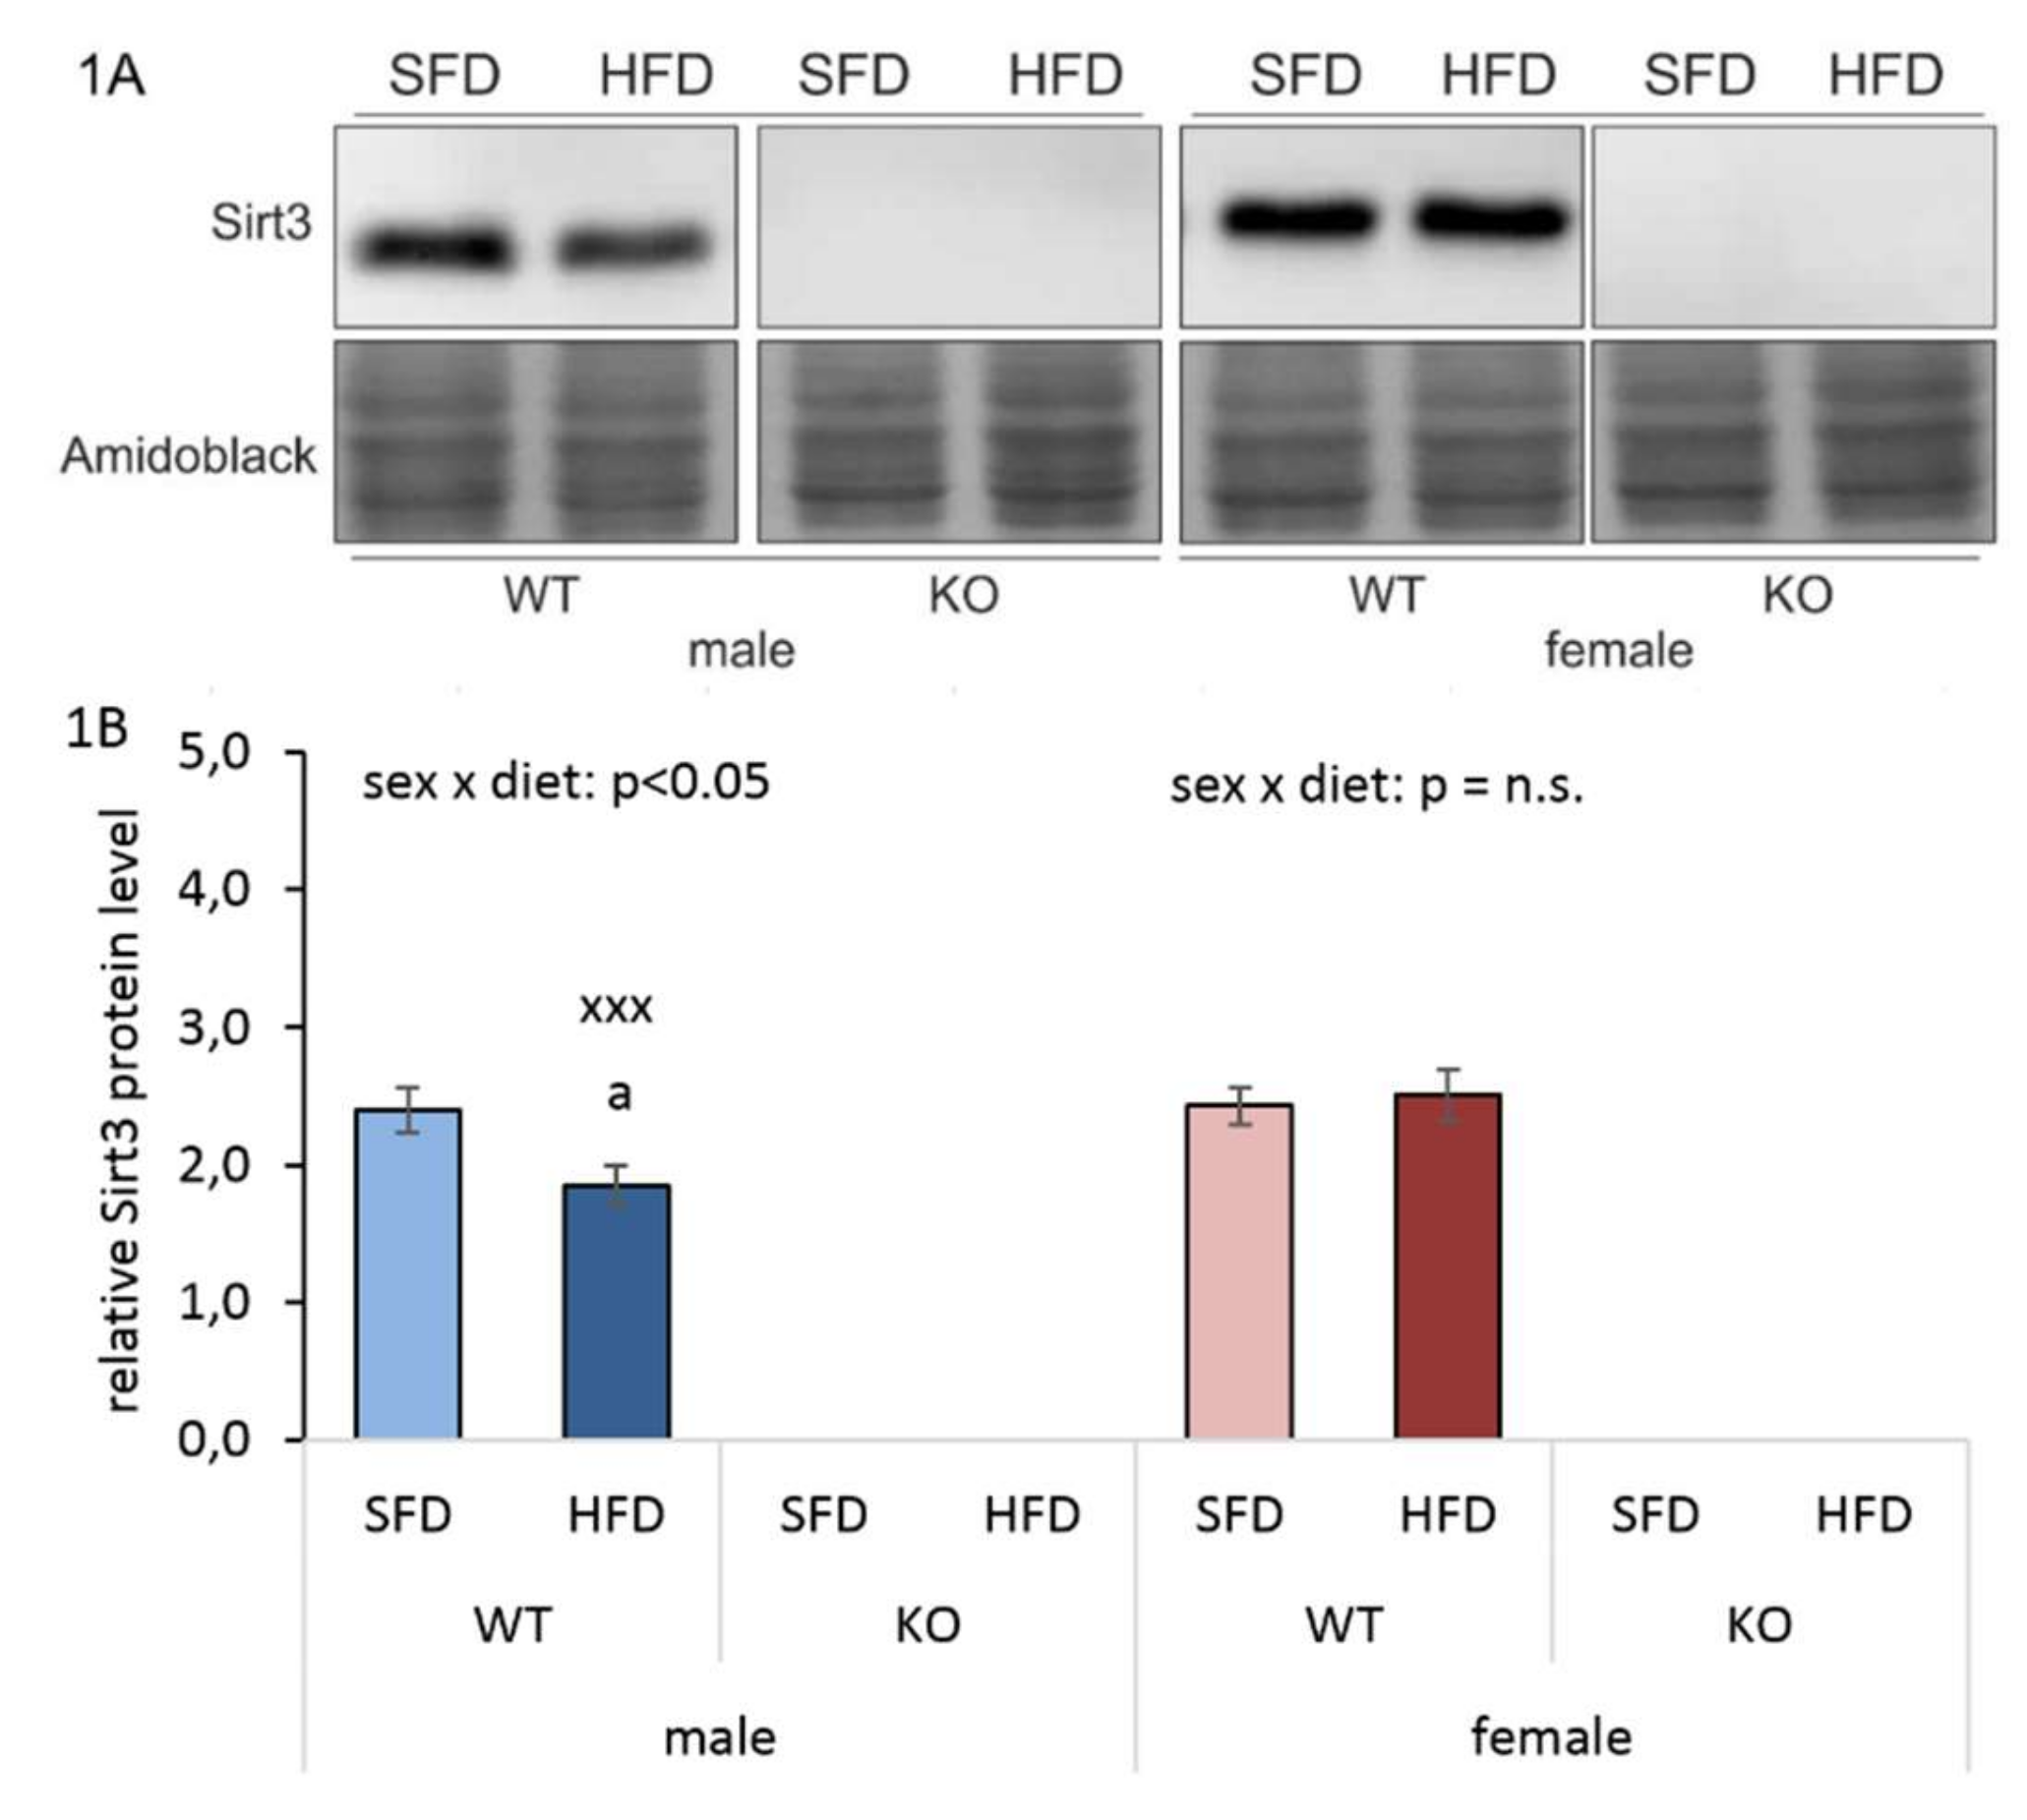 Antioxidants Free Full-Text Role of Sirt3 in Differential Sex-Related Responses to a High-Fat Diet in Mice